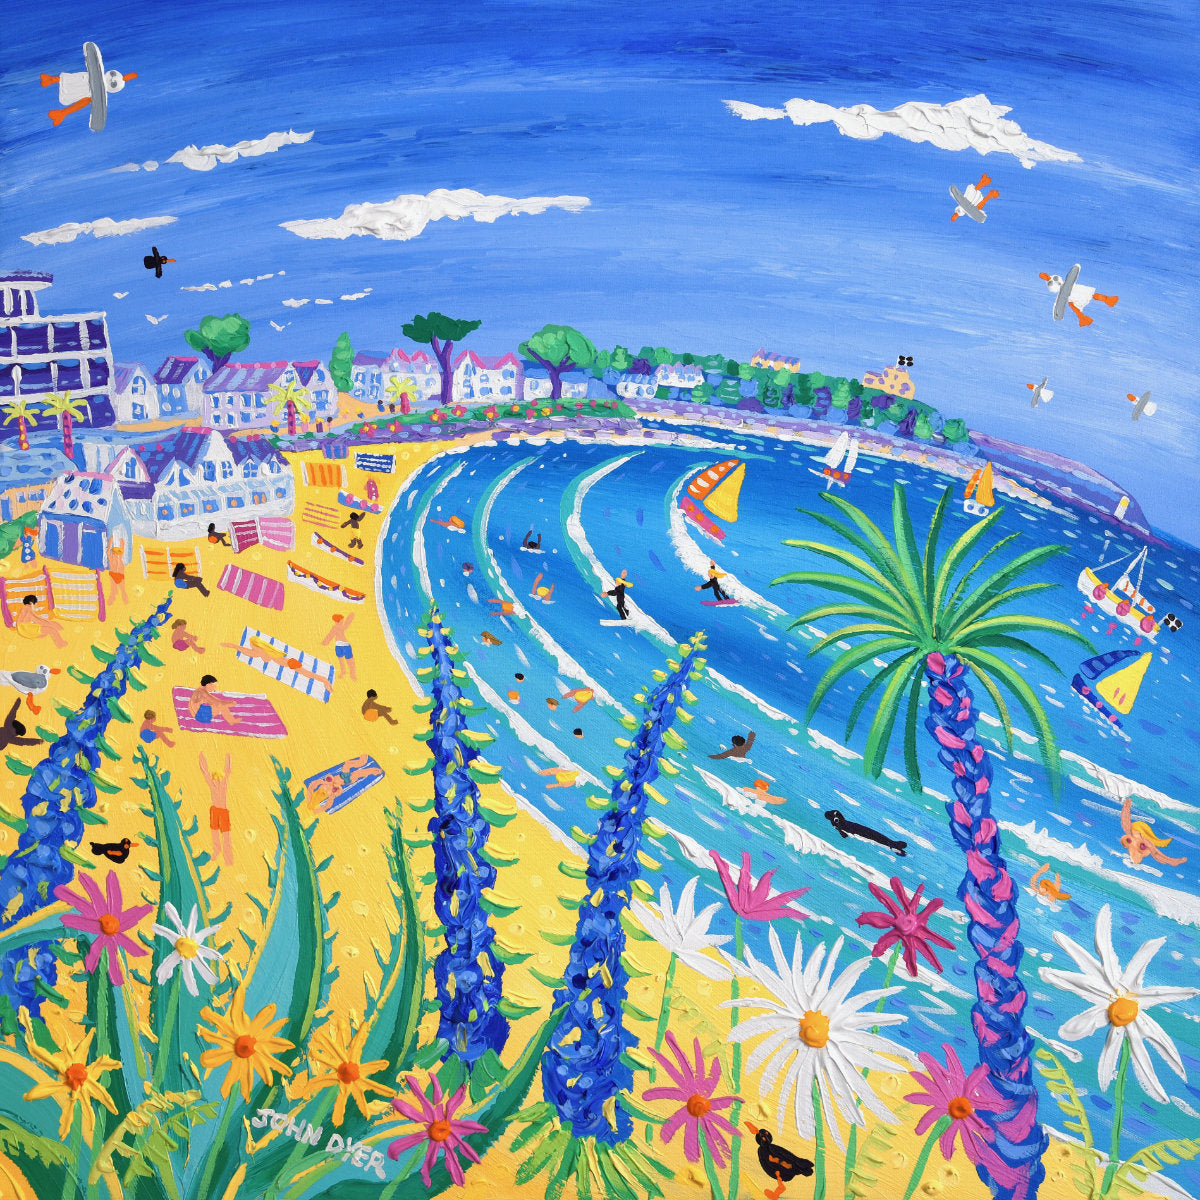 &#39;Tropical Days at Gyllyngvase Beach, Falmouth&#39;, 30 x 30 inches acrylic on canvas. Coastal Paintings of Cornwall by Cornish Artist John Dyer